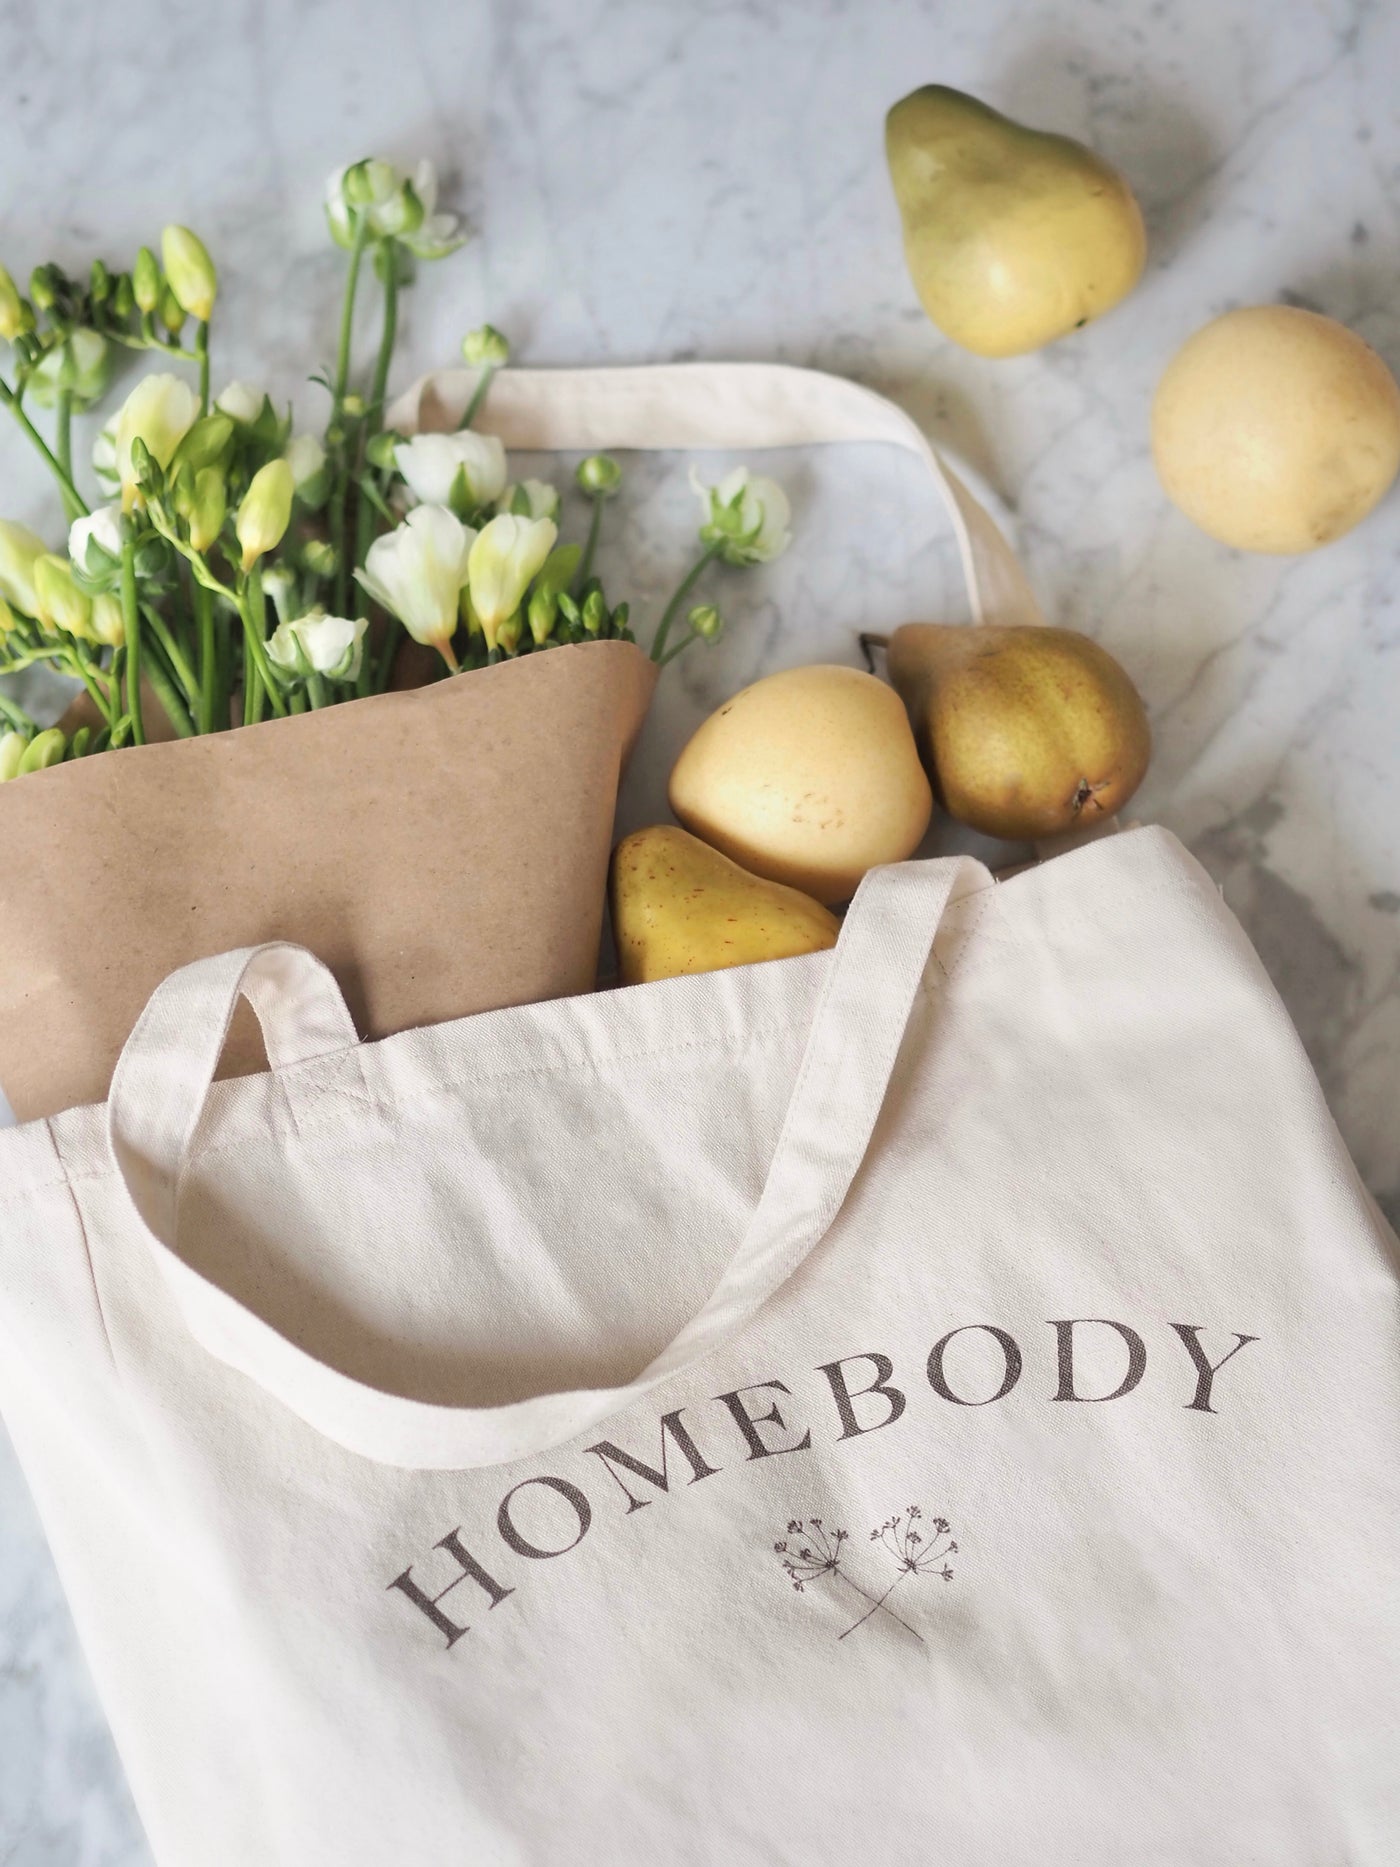 The Cross 'Homebody' Tote Bag | Limited Edition